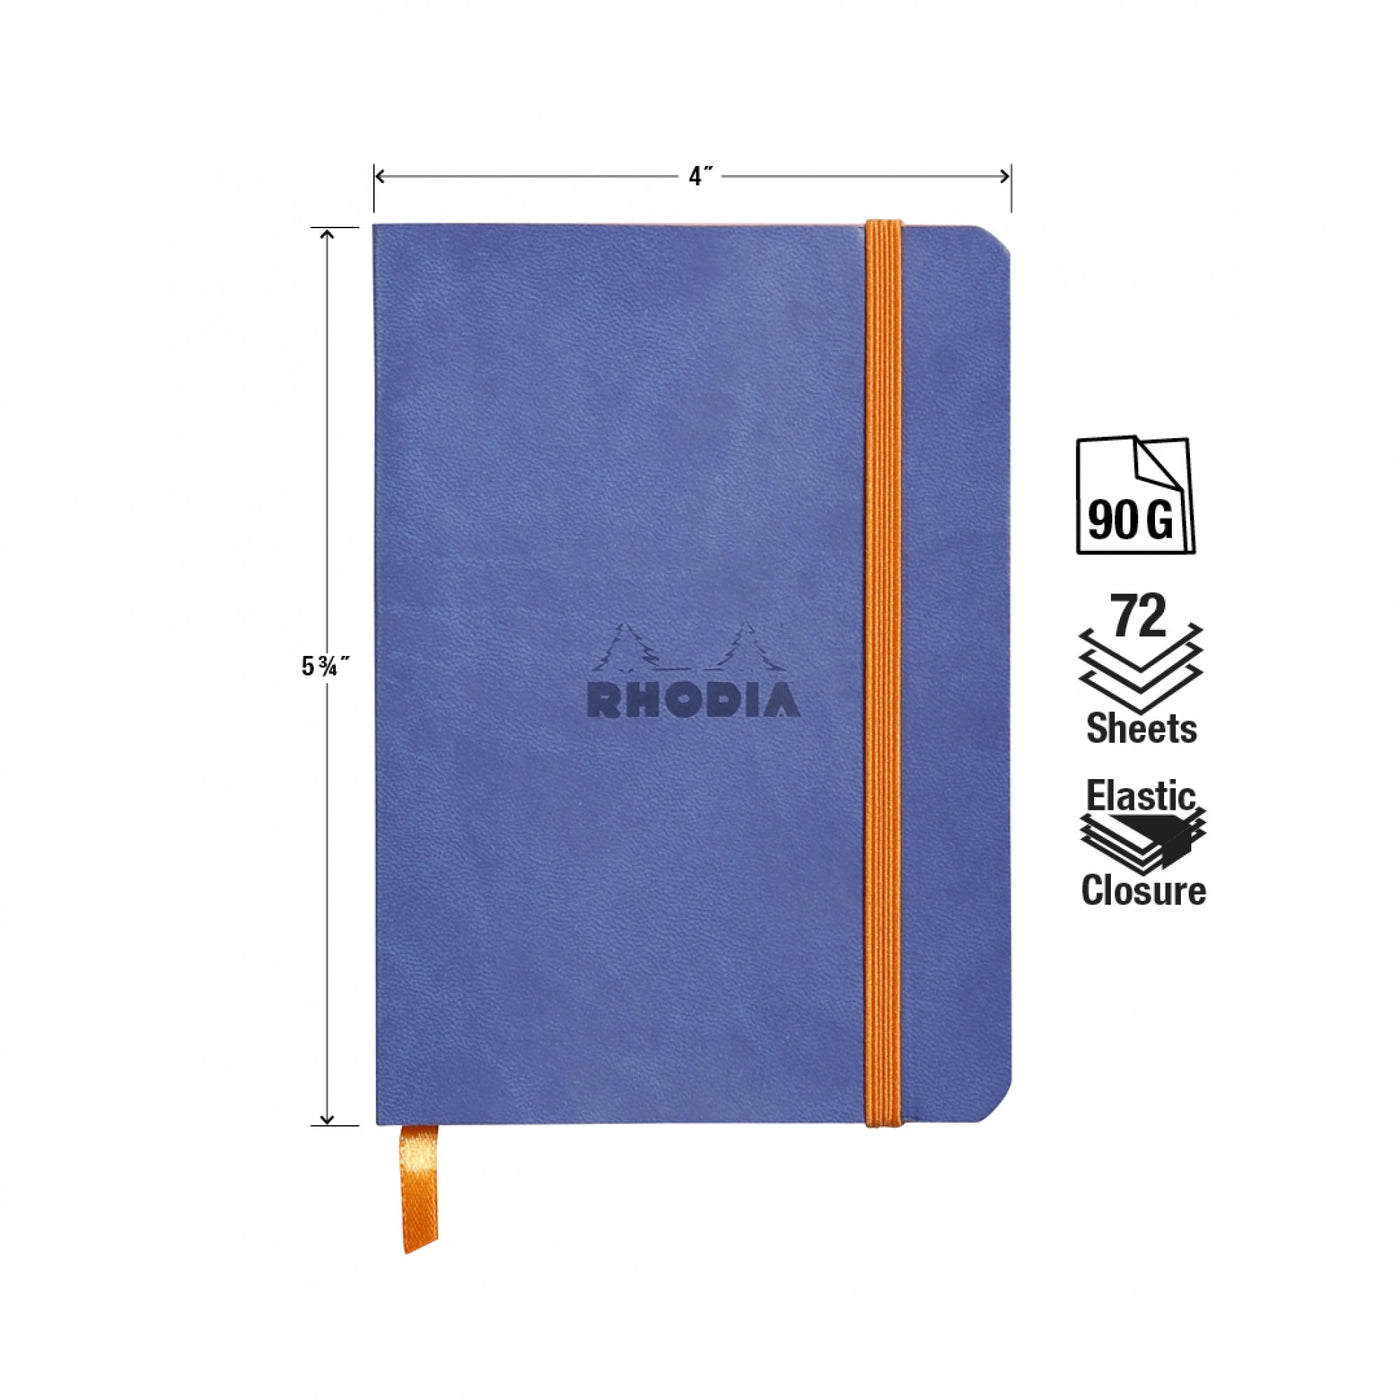 Rhodia Rhodiarama Soft Cover A6 Sapphire Lined Notebook Measurements